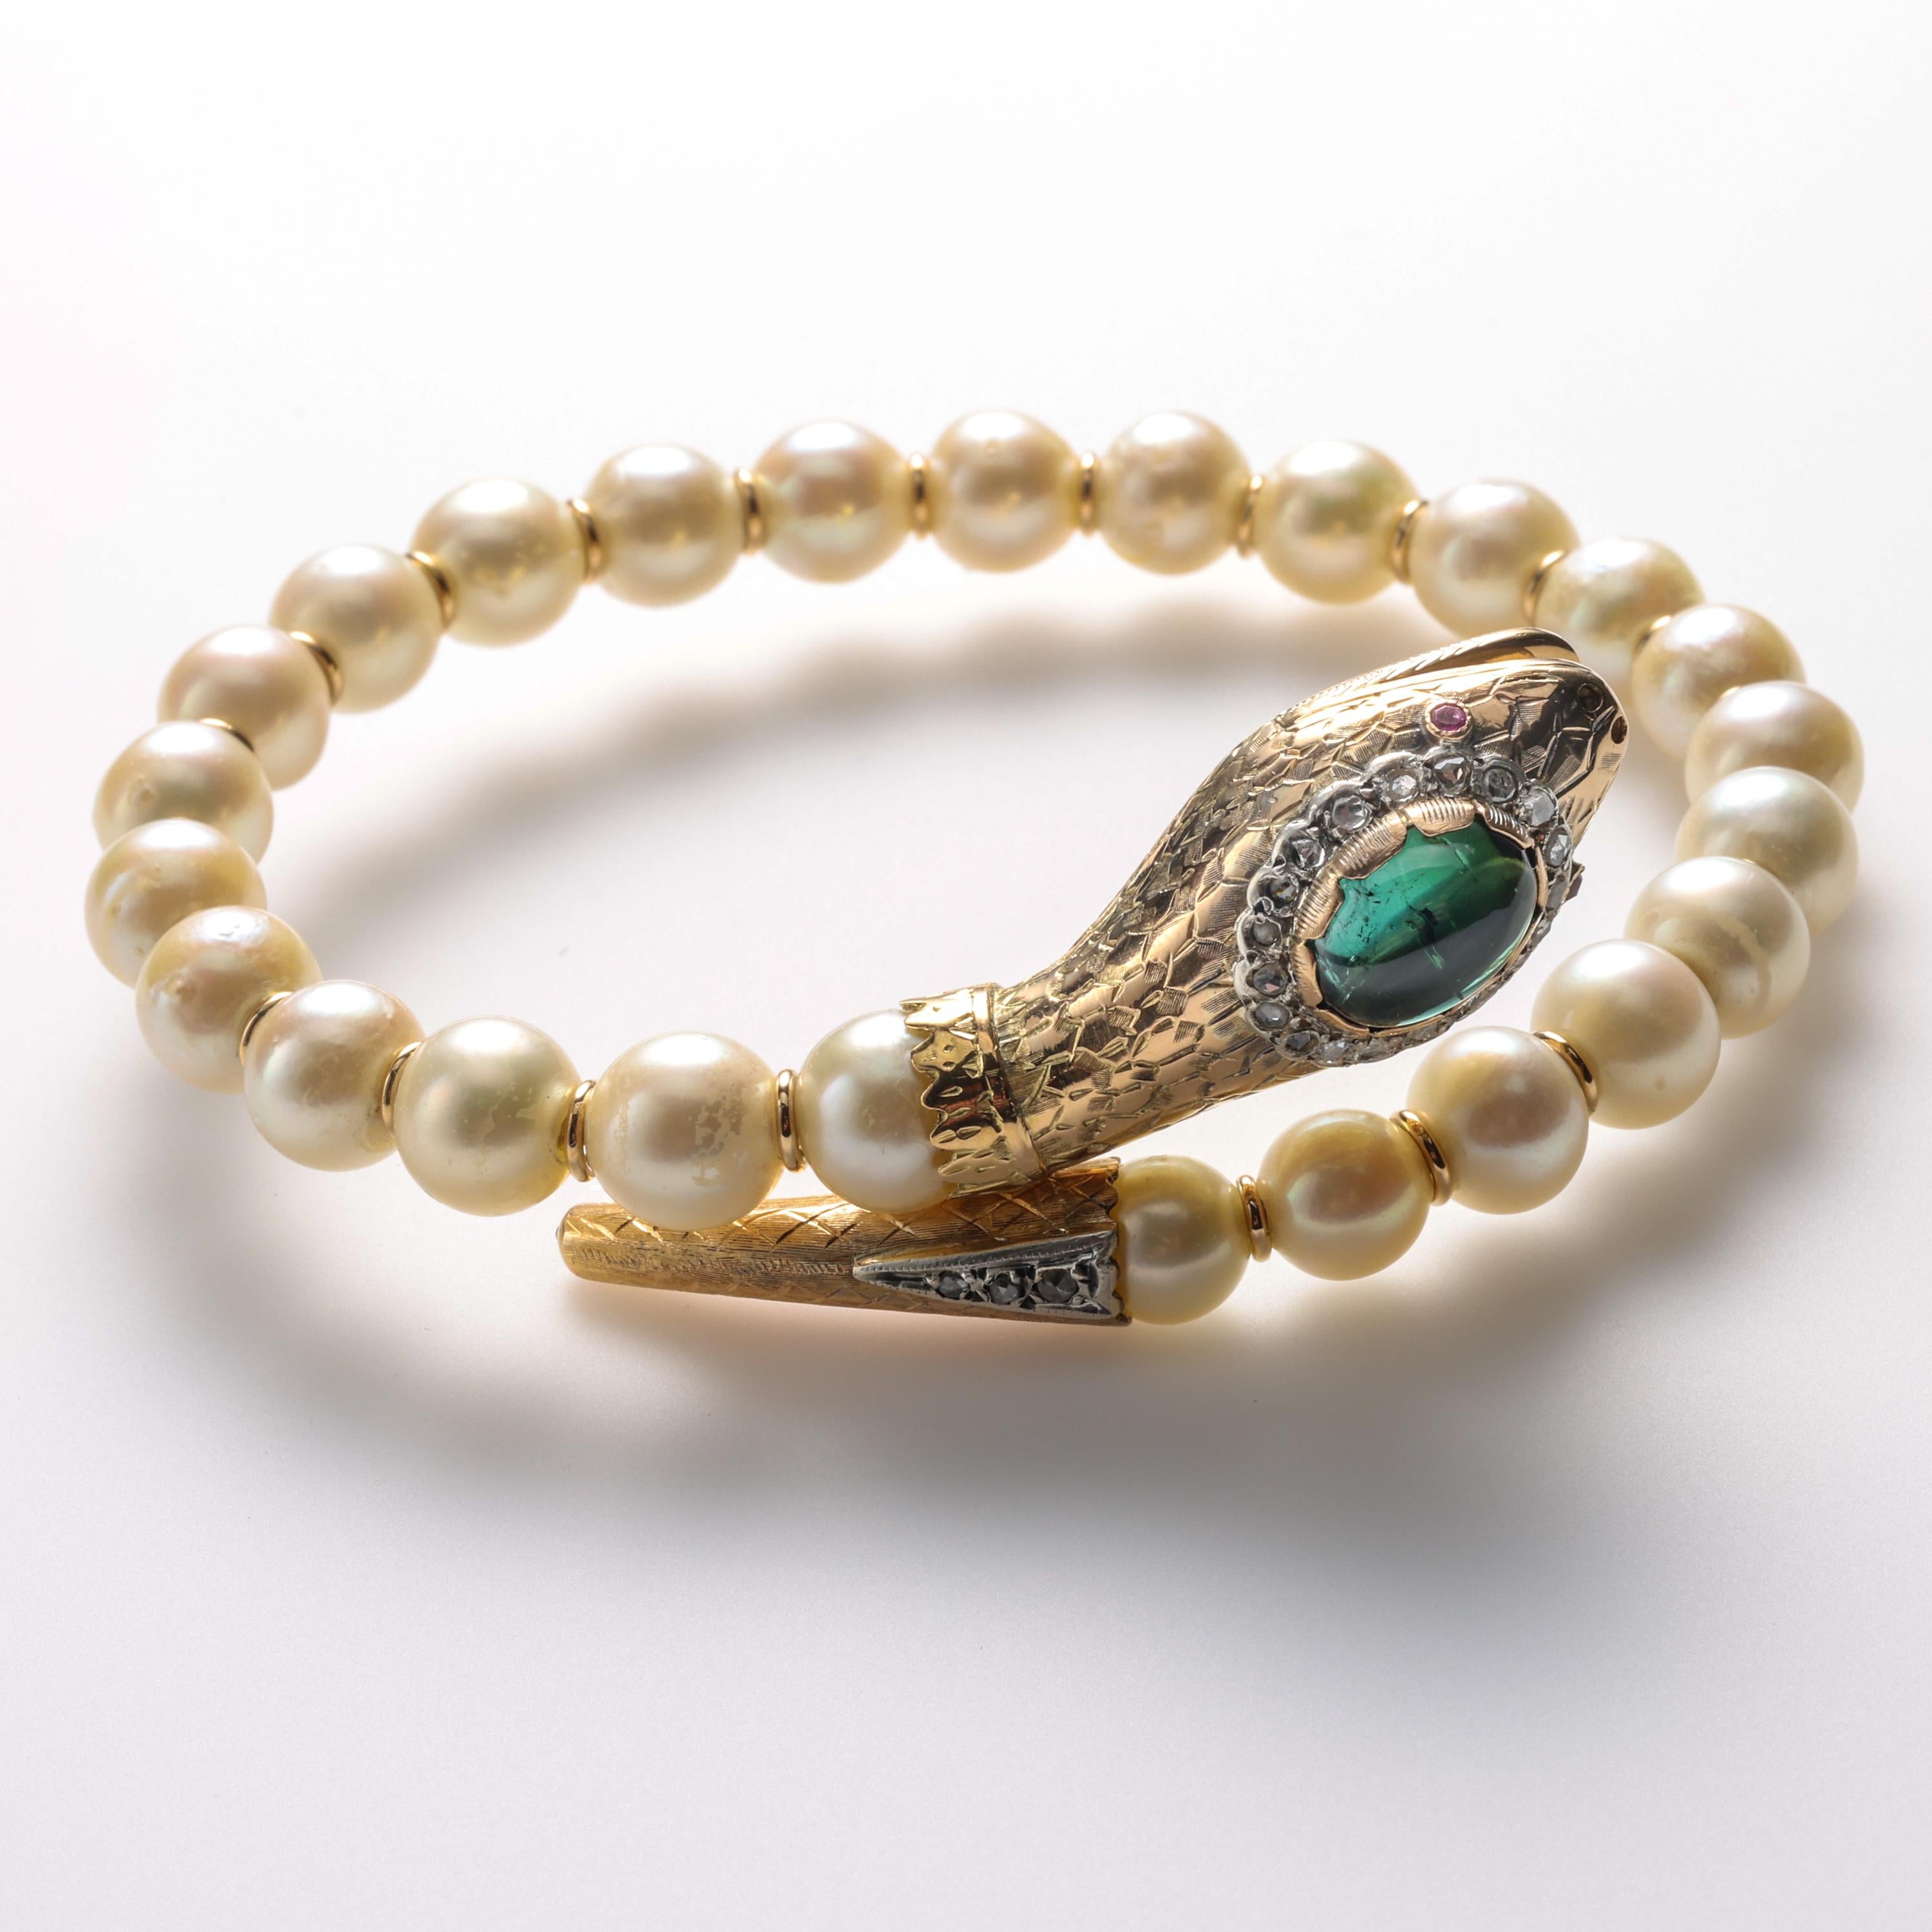 This ravishing and utterly unique serpent bracelet was created near the 1940s in the Victorian style. Twenty-five saltwater pearls strung on 15K (at least) gold are capped on either end with the head and tail of an endearingly charming serpent. The